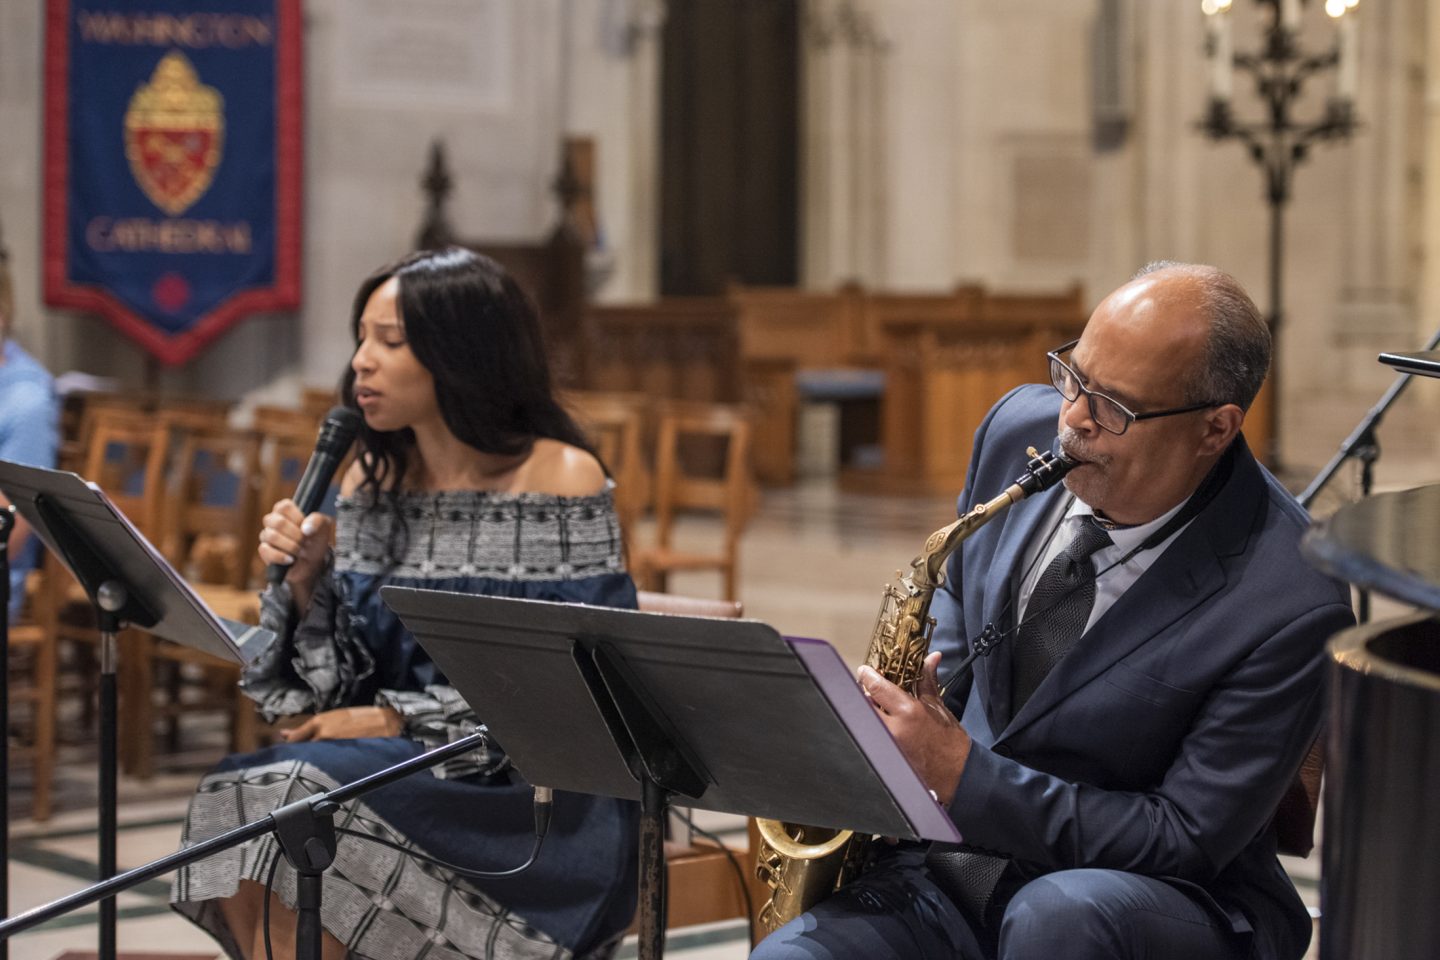 Singer singing and holding a microphone next to a saxophonist playing the saxophone, both seated, in the Cathedral